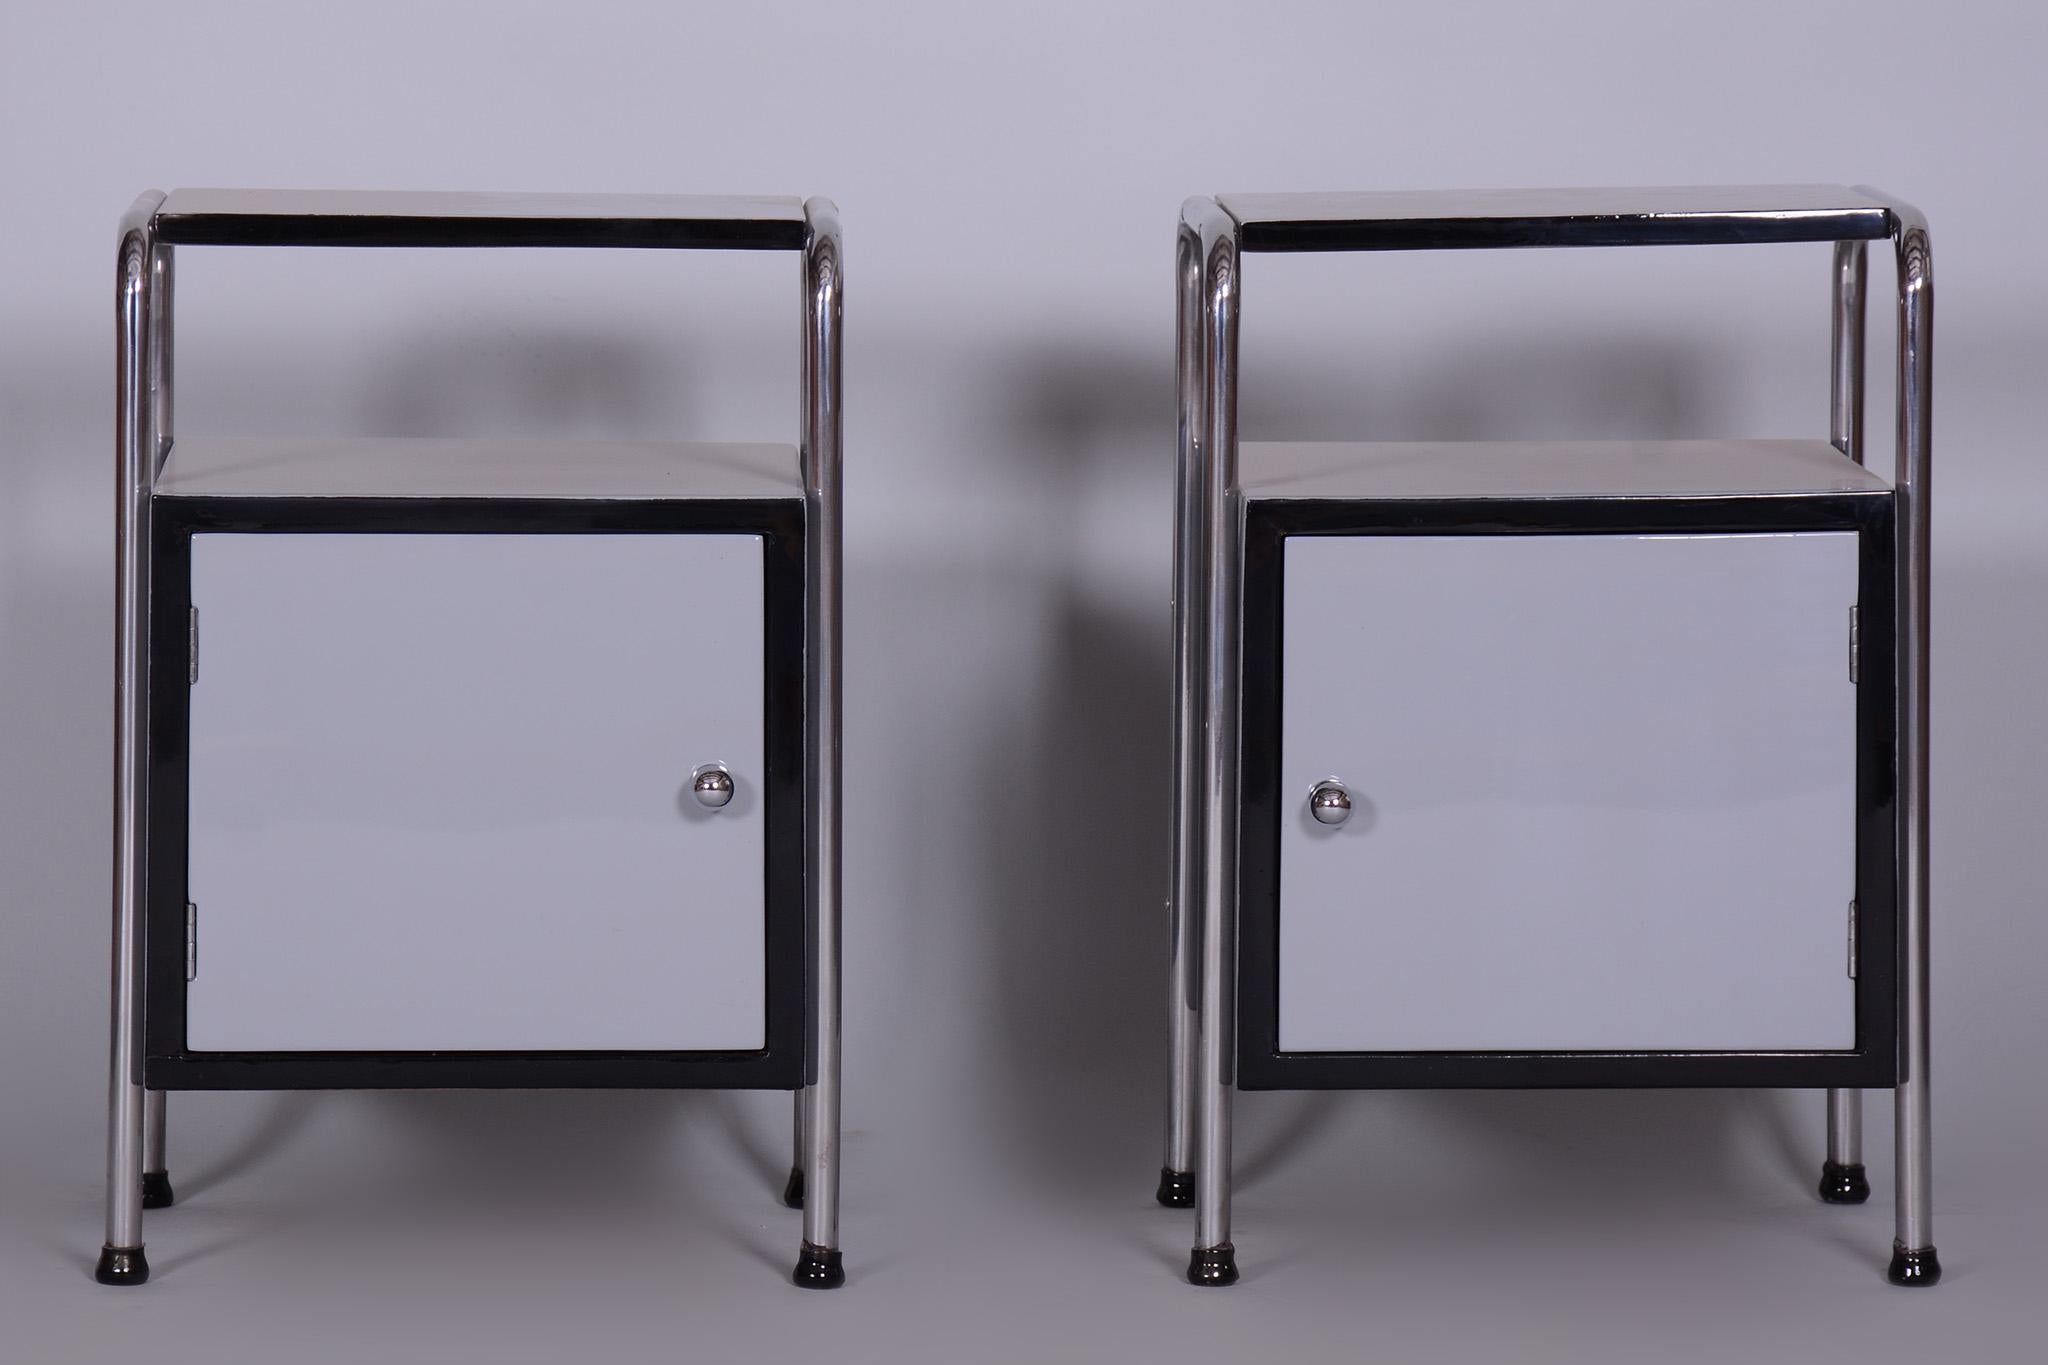 Restored Bed-Side Tables, Vichr a Spol, Chrome-Plated Steel, Czechia, 1930s For Sale 4